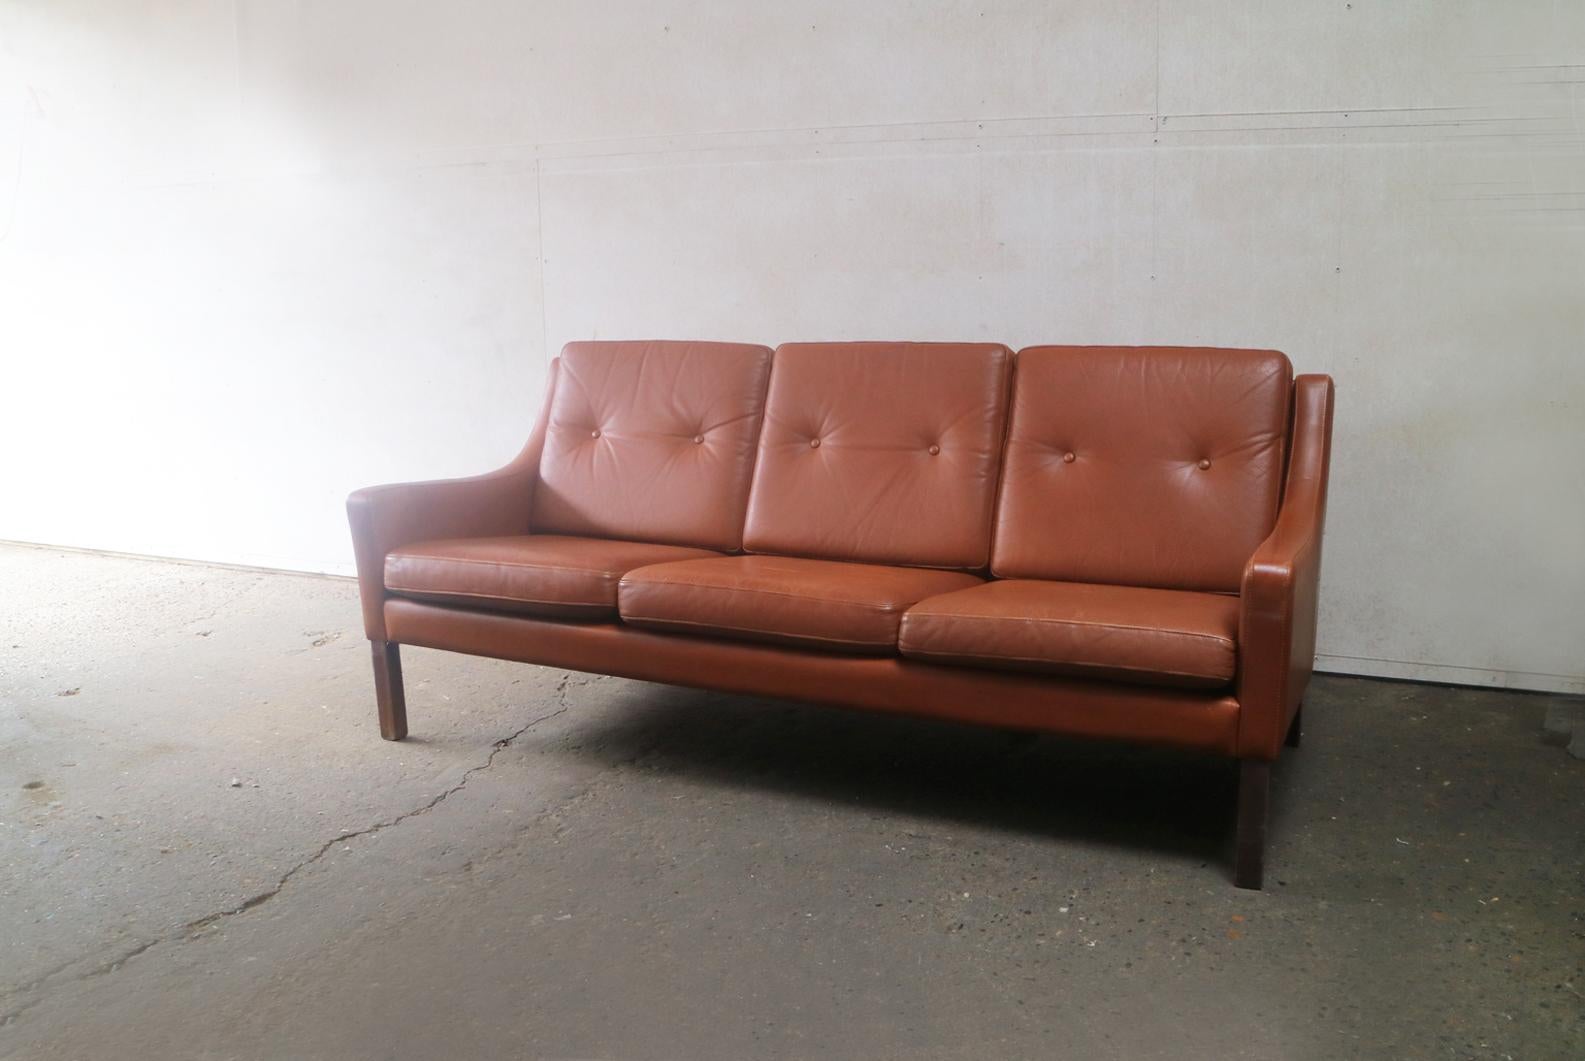 Very handsome sofa design very similar to those of Danish designer Børge Mogensen. Upholstered in the original tan leather. Sits on stained beech legs.